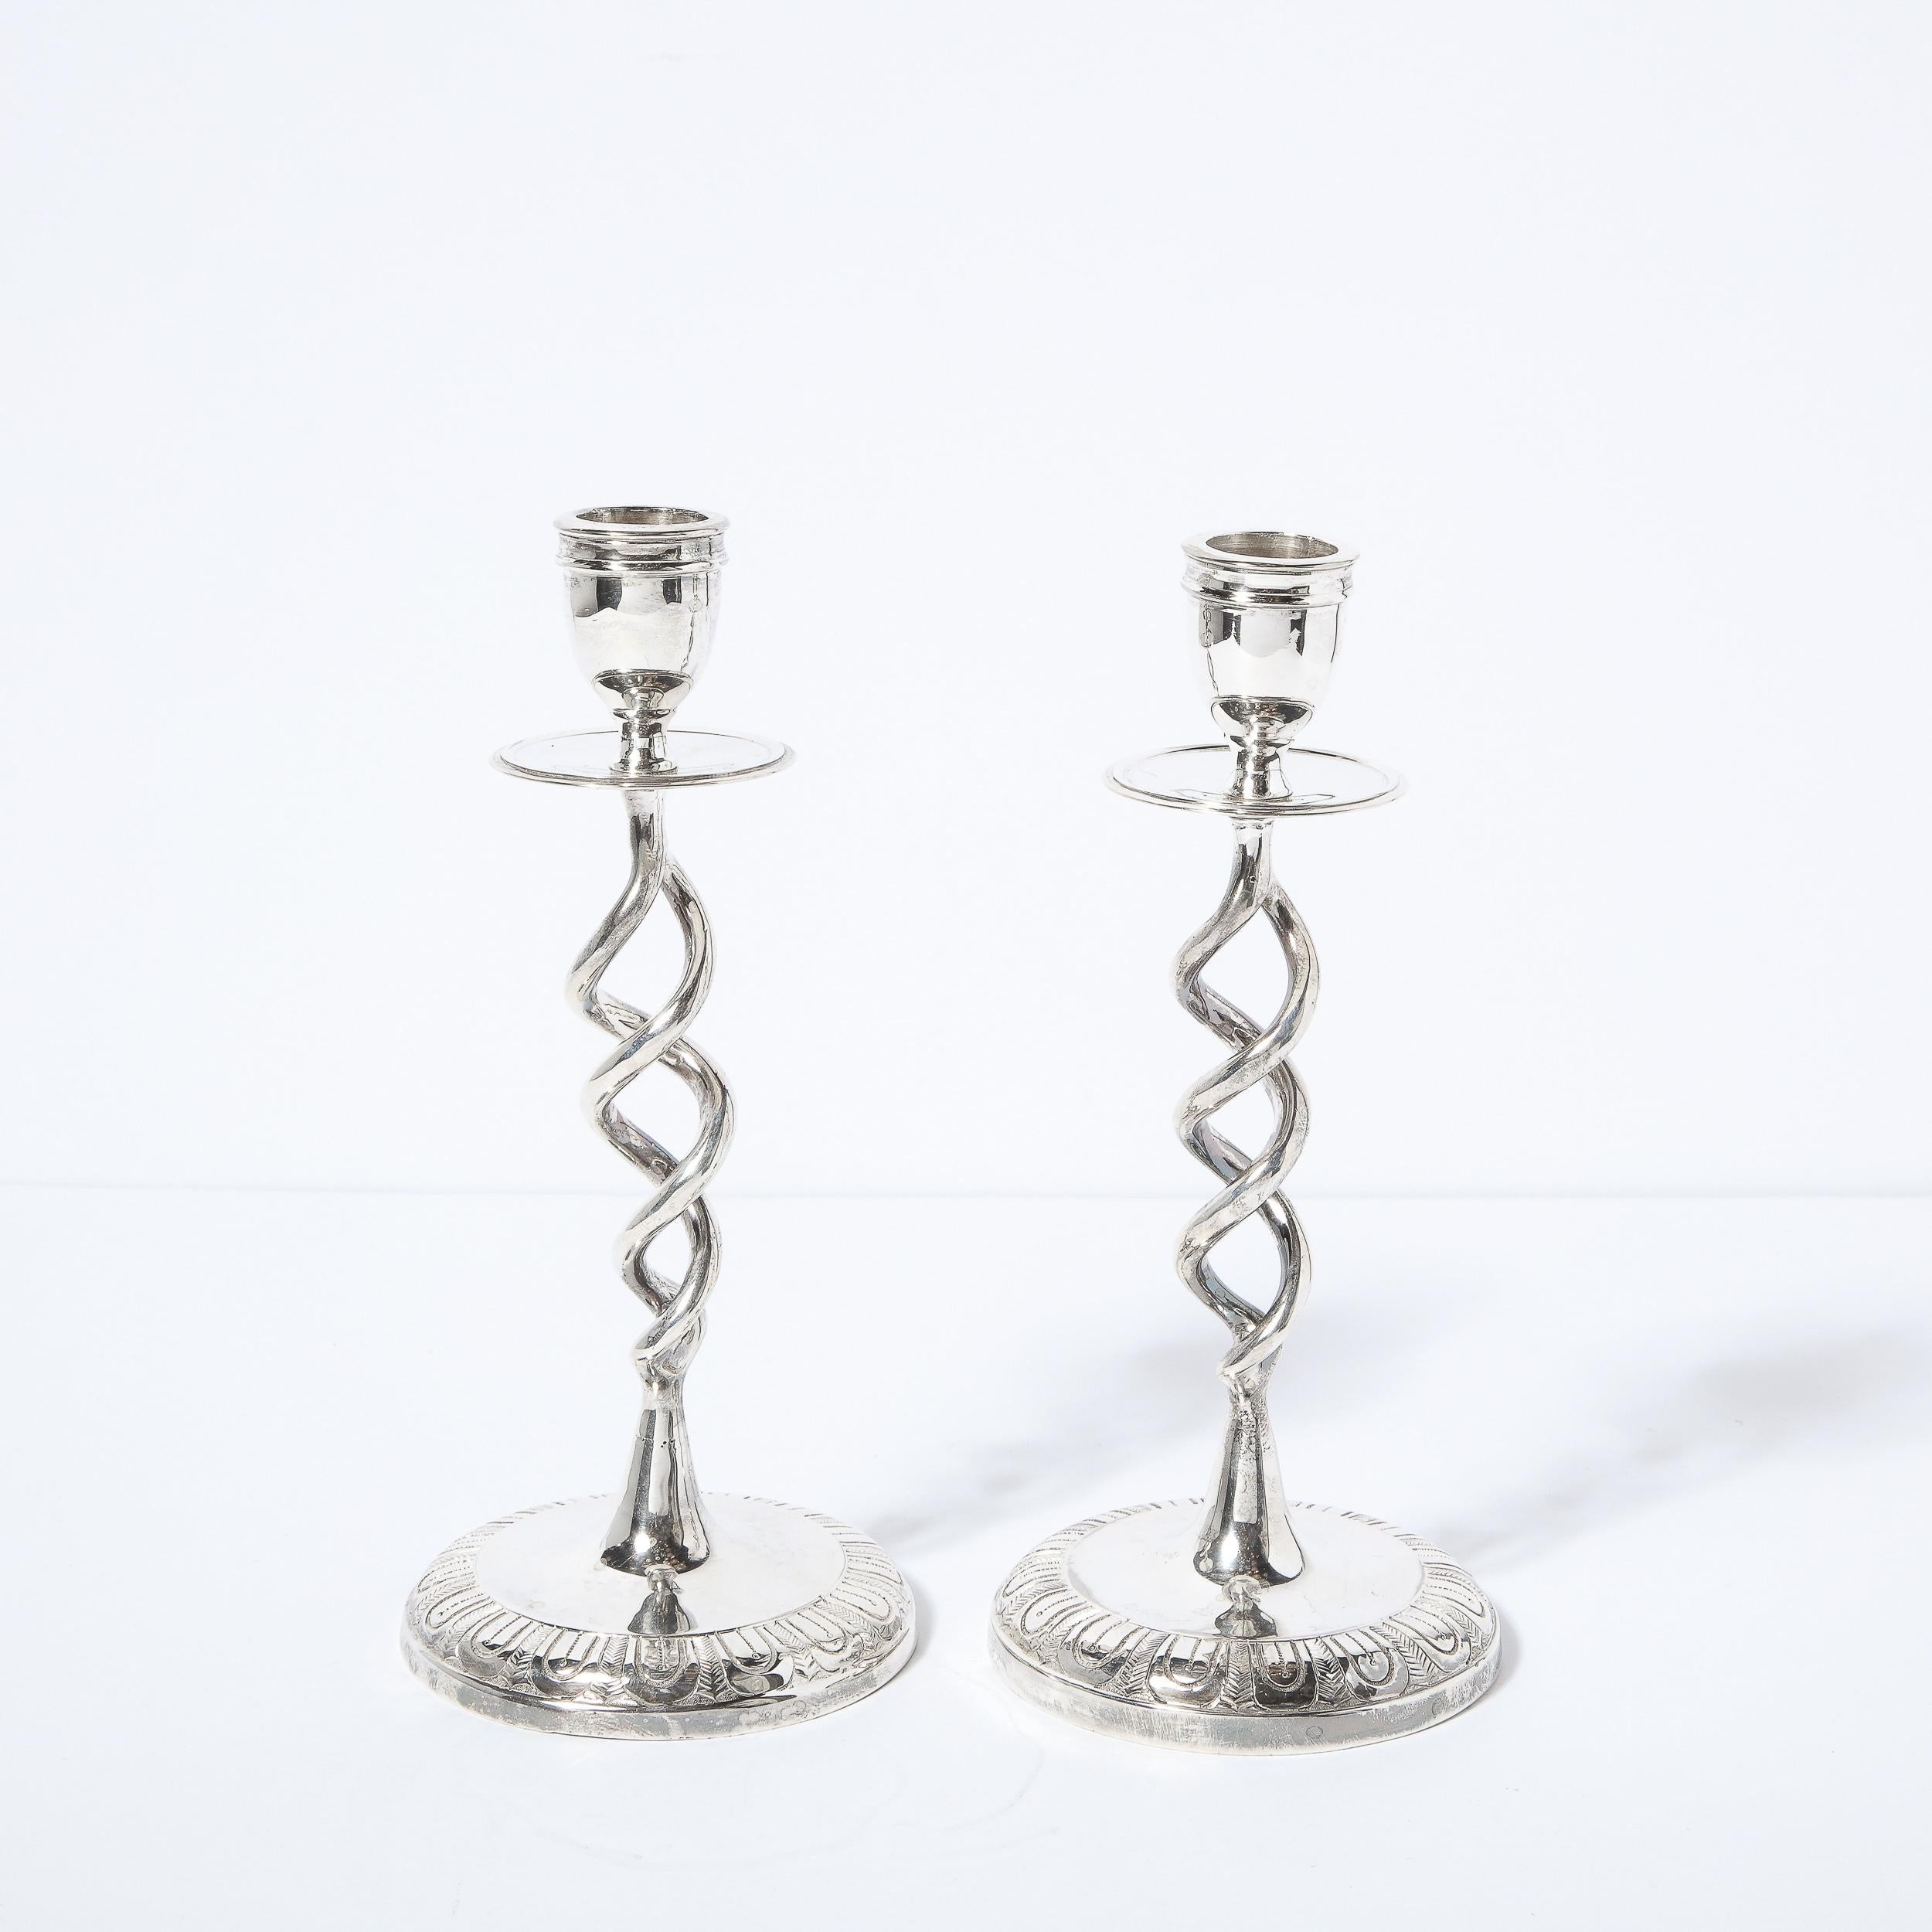 English Pair of British Mid-Century Modern Nickel Helix Form Candle Holders For Sale